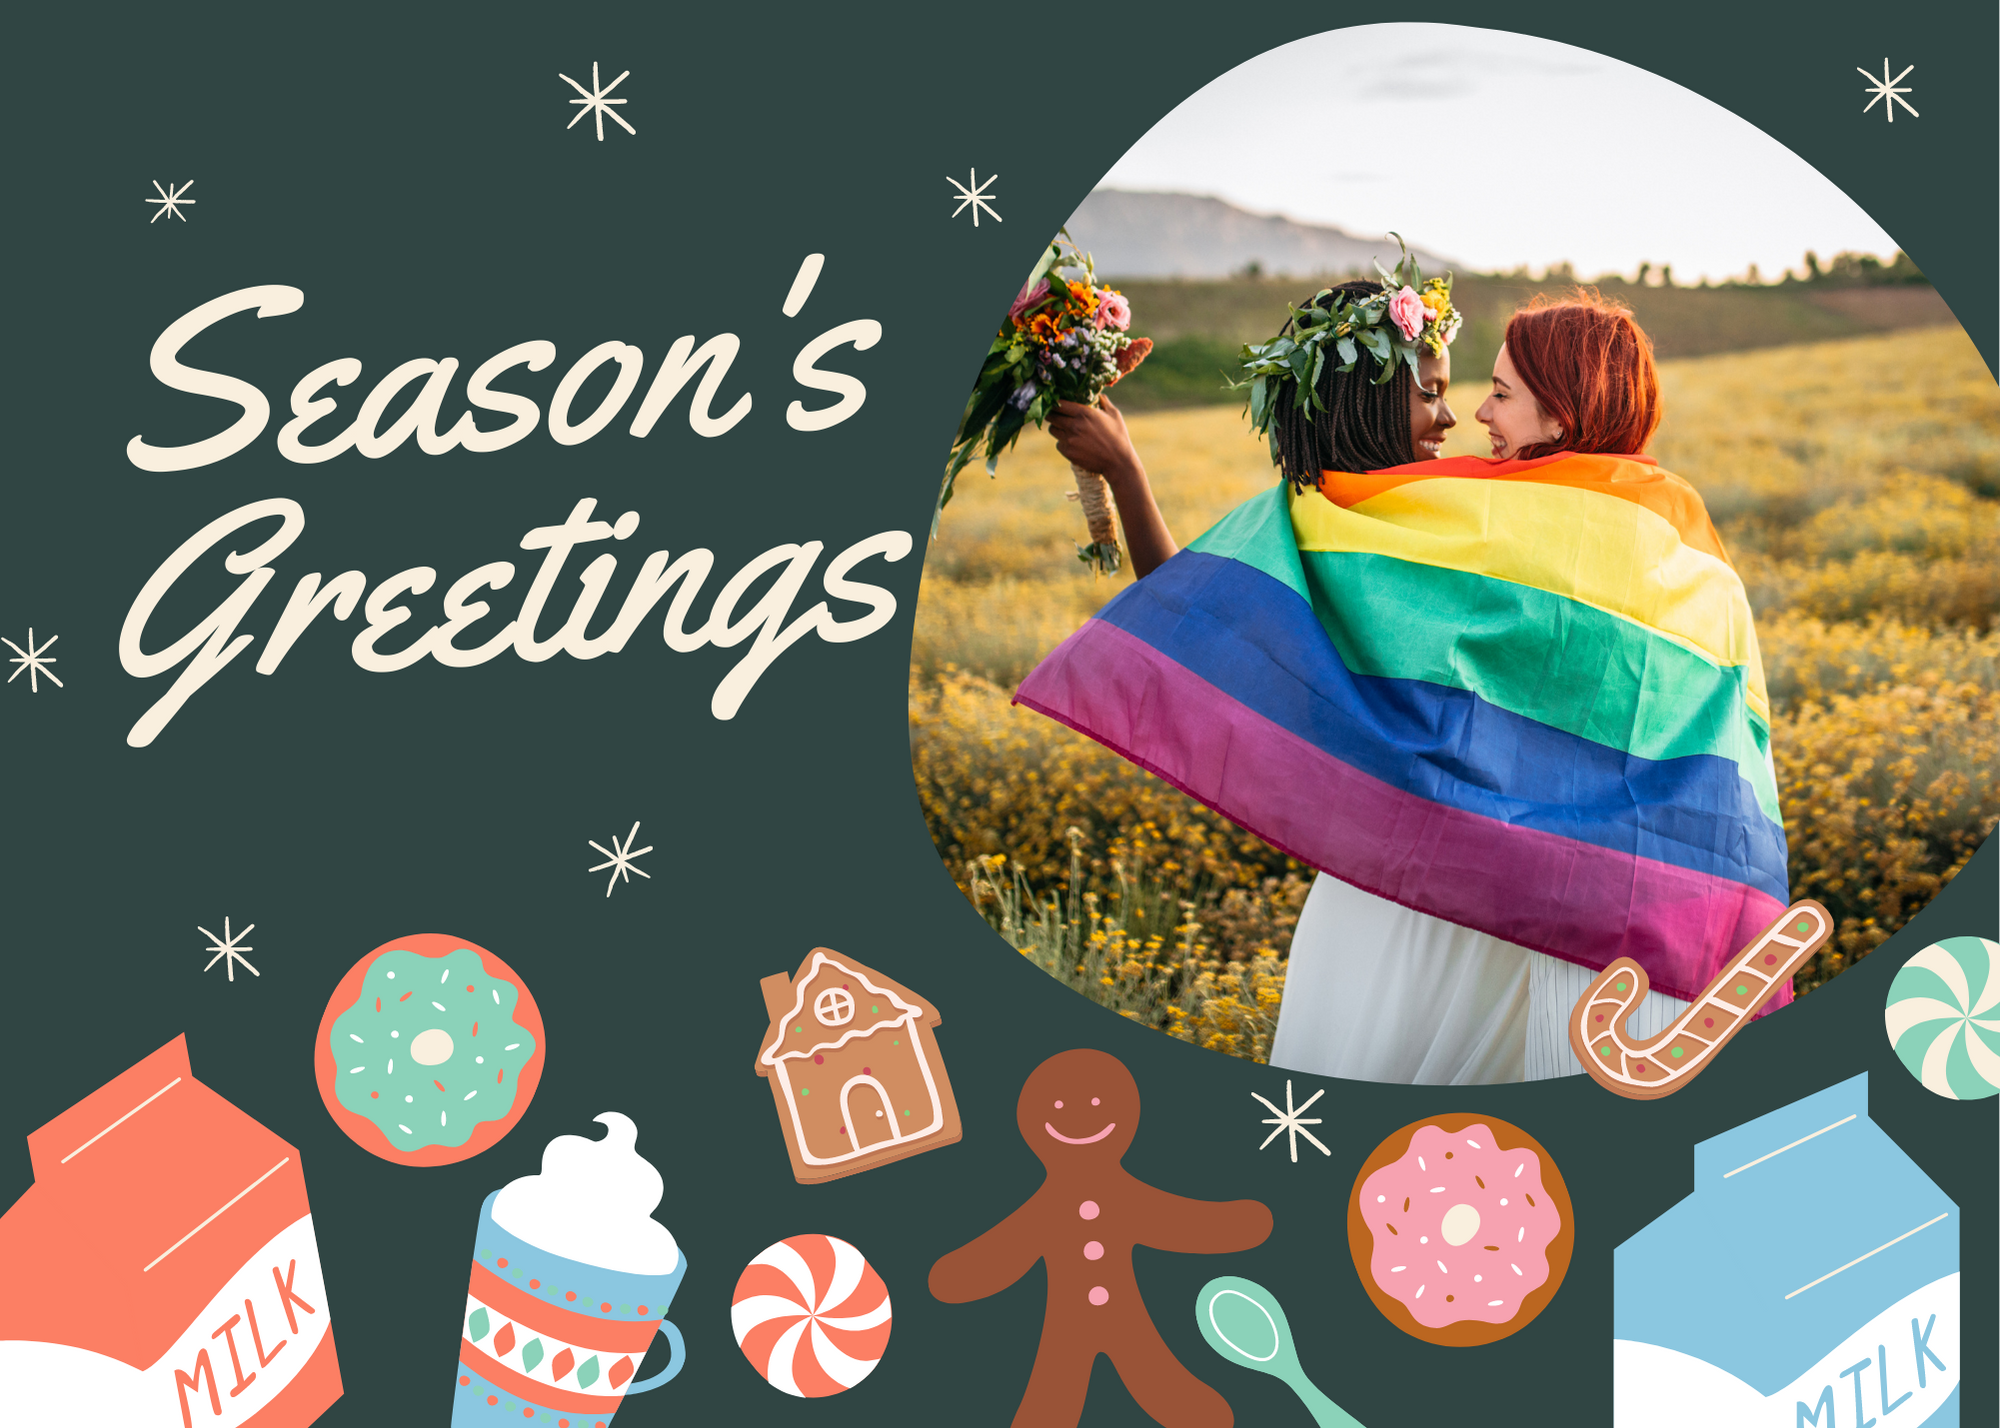 EOSA e-card design with message of season's greetings 